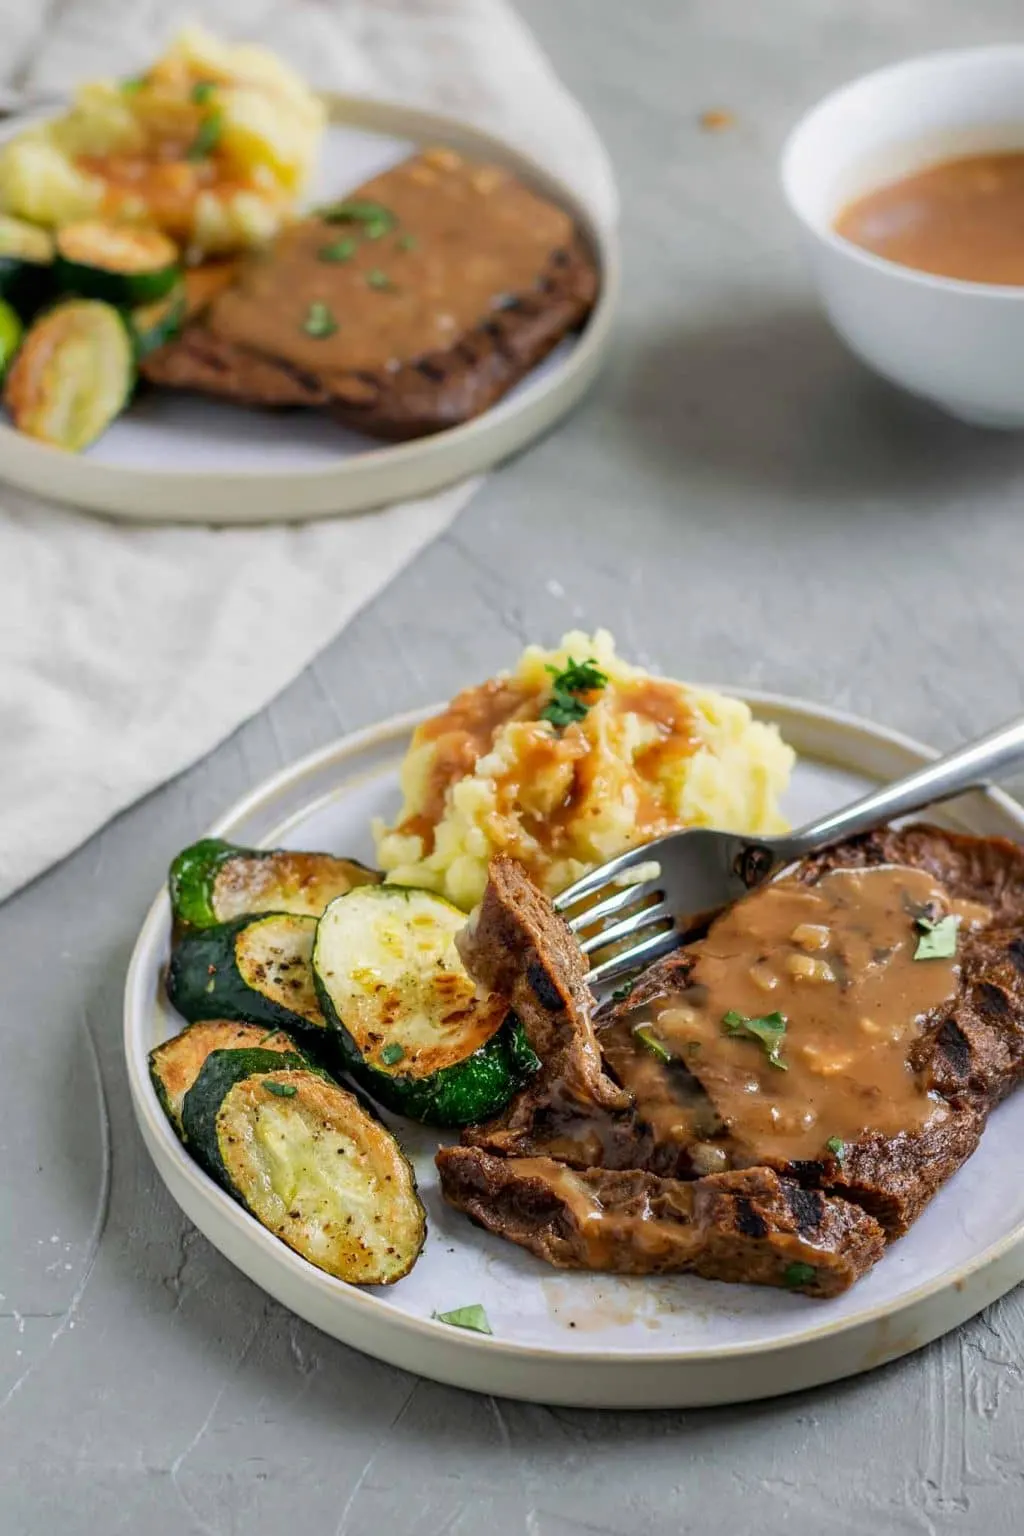 Grilled homemade seitan steaks with mashed potatoes and shallot gravy with a side of zucchini and a garnish of parsley. The steak is cut with one bite on a fork and there is extra gravy served on the side.